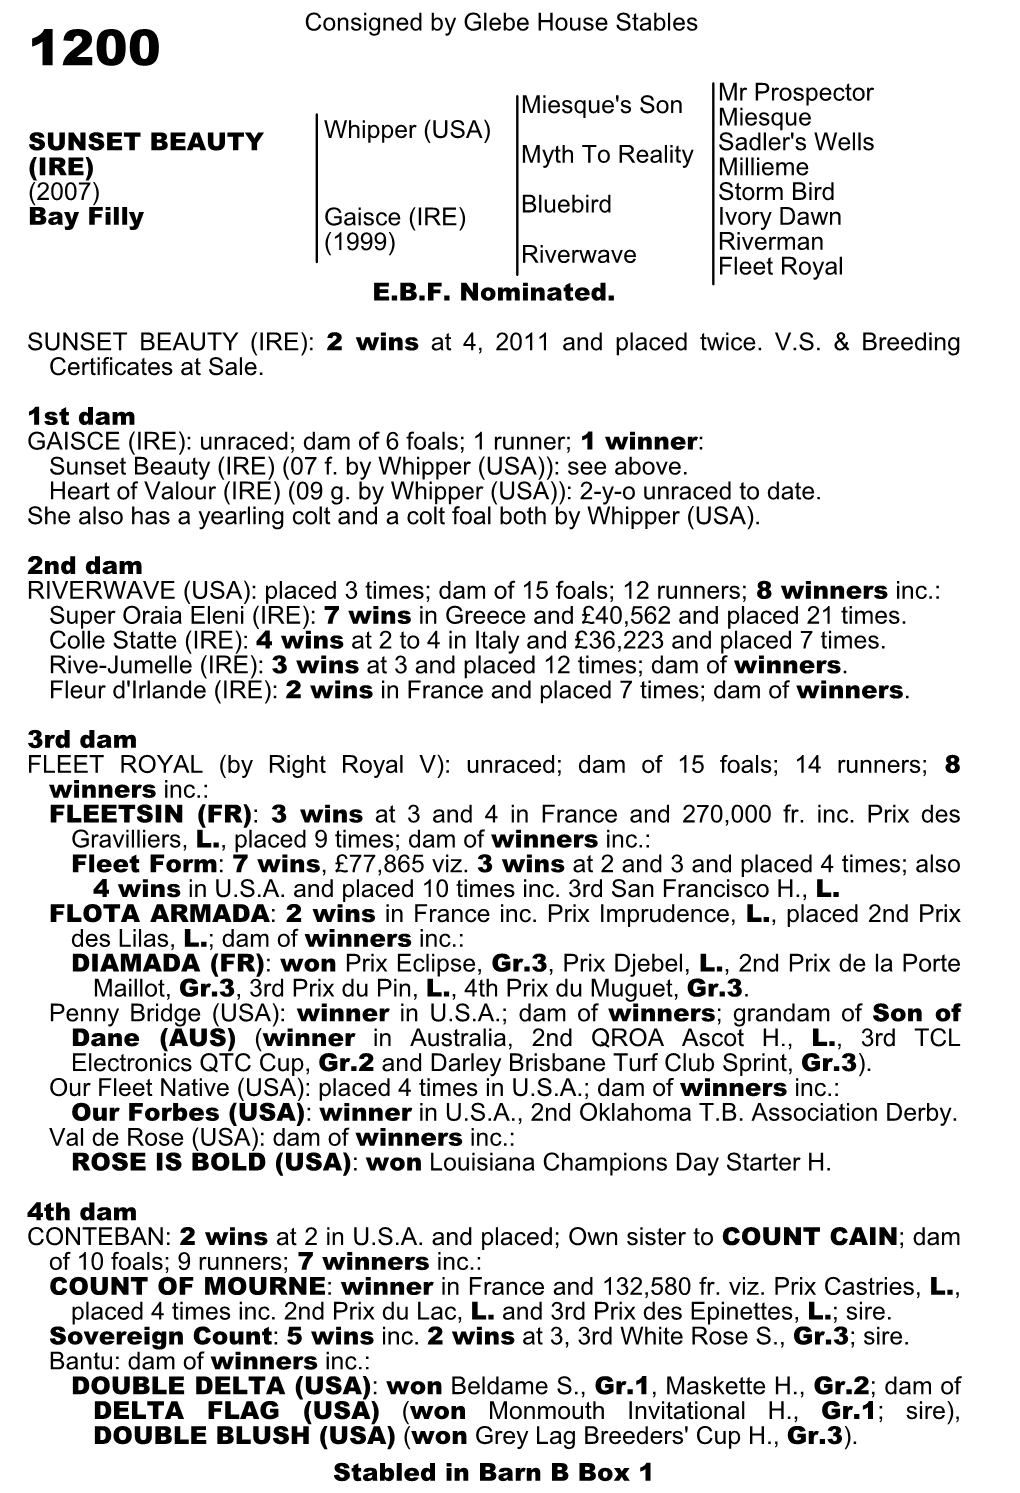 Consigned by Glebe House Stables Miesque's Son Mr Prospector